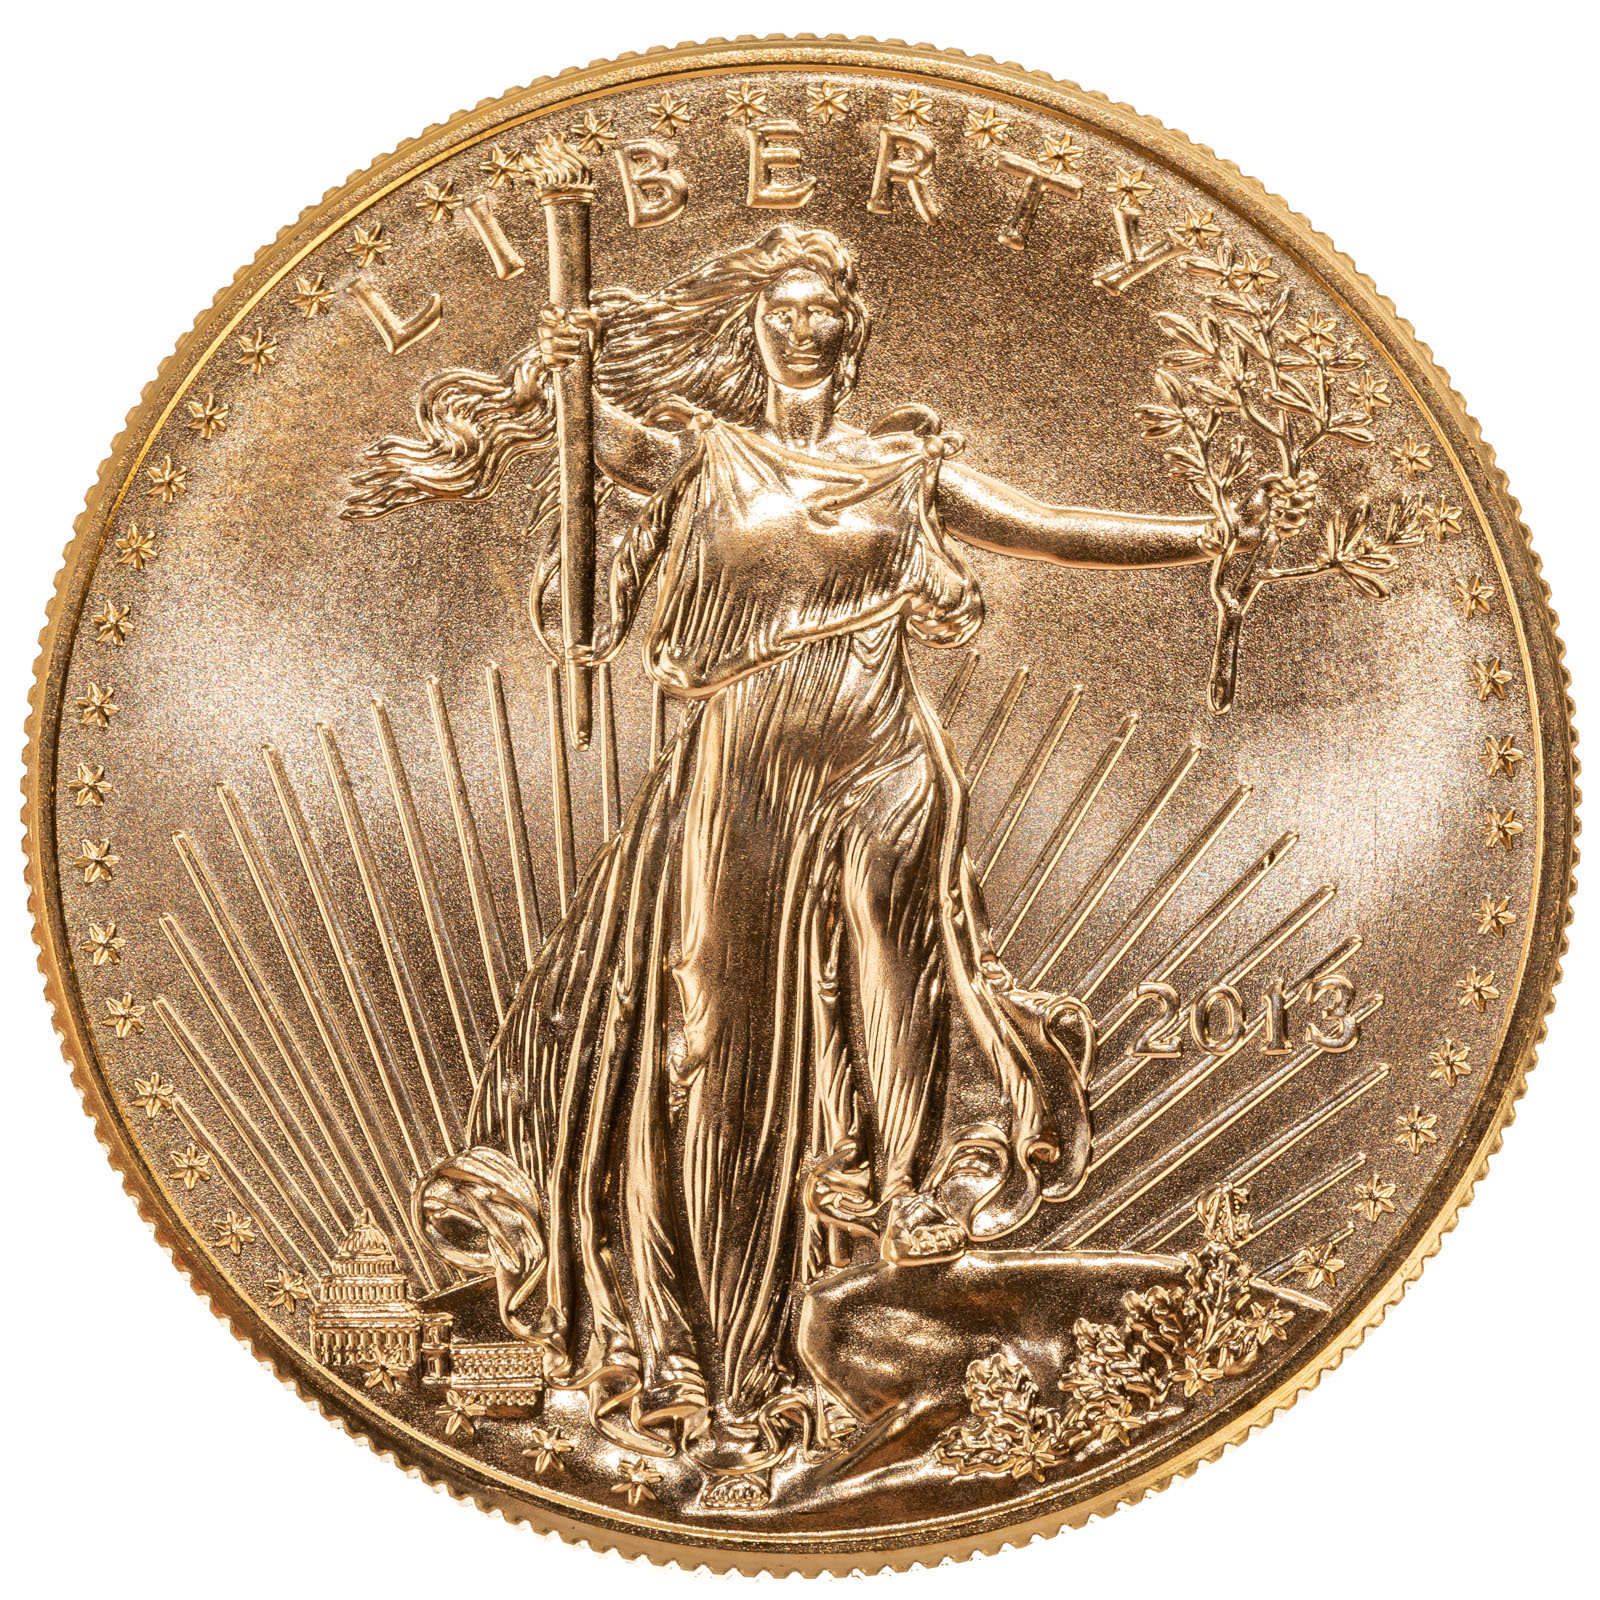 2013 $50 1 OUNCE GOLD AMERICAN